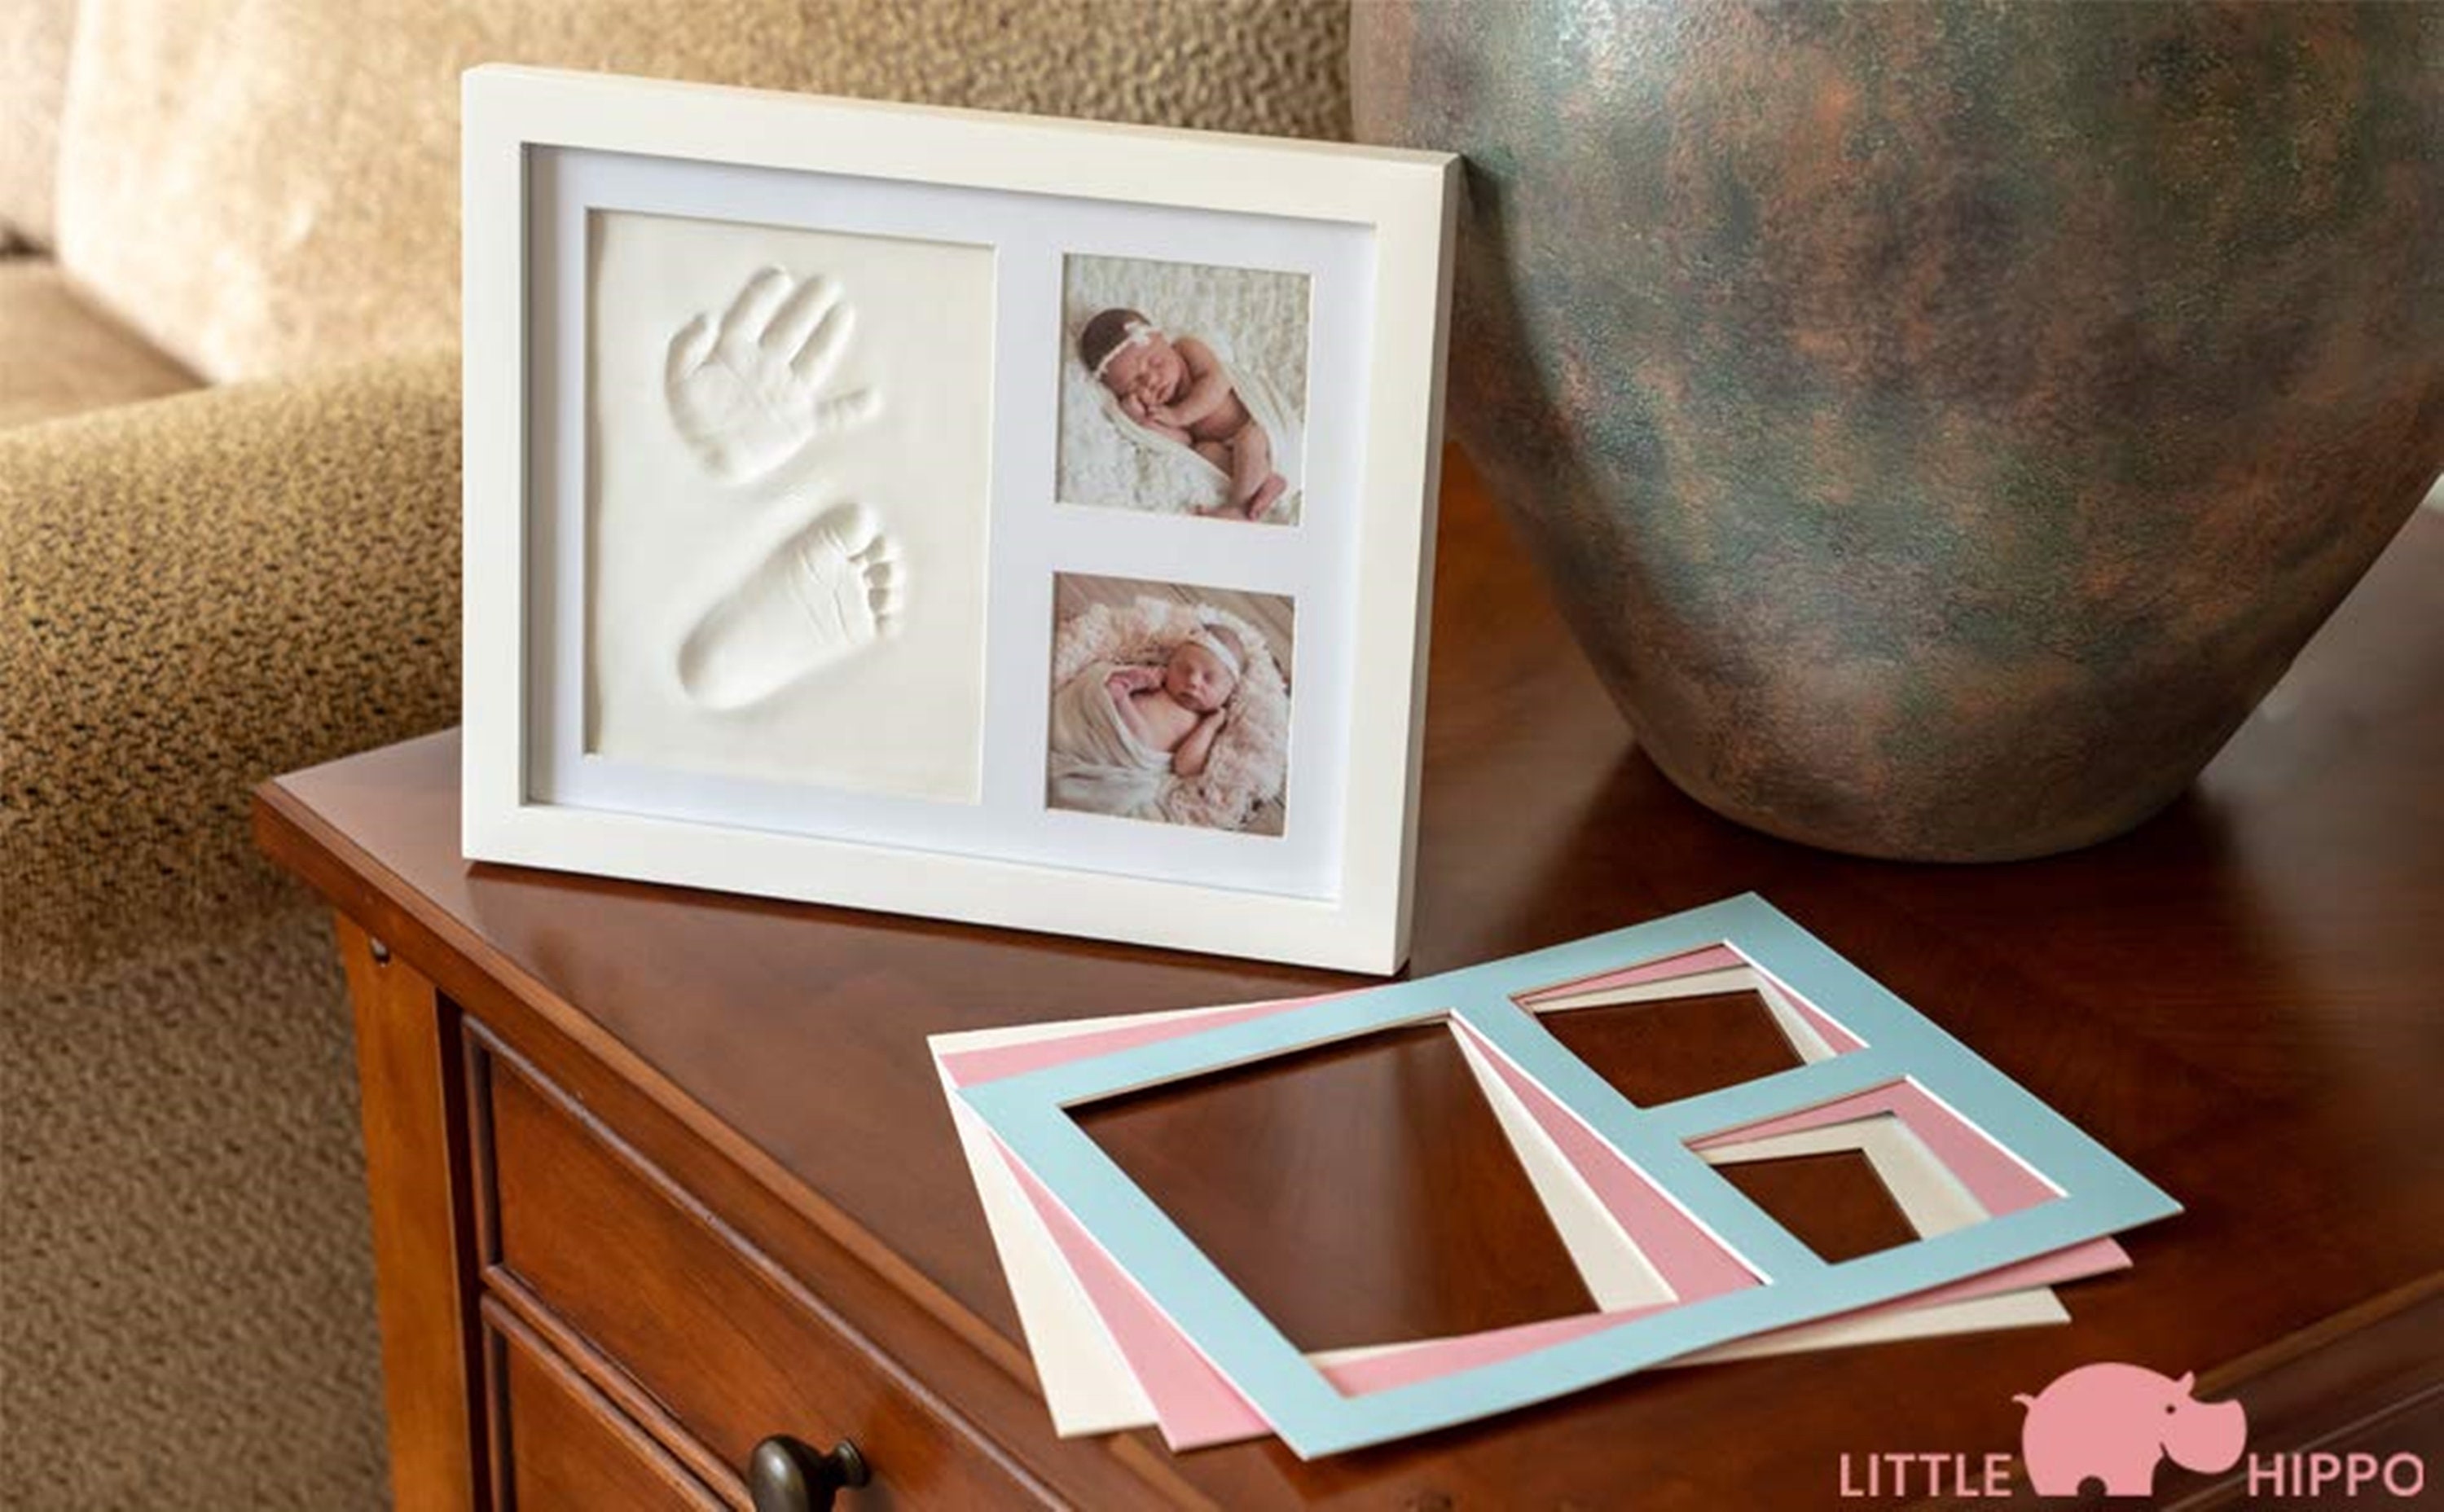 Clay Baby Hand and Footprint Kit with Photo Wall Mount Frame Kit - Inkless Baby  Footprint & Handprint Keepsake for Birthdays & Family Activities (Black  Frame) - Proud Baby by Luna Bean